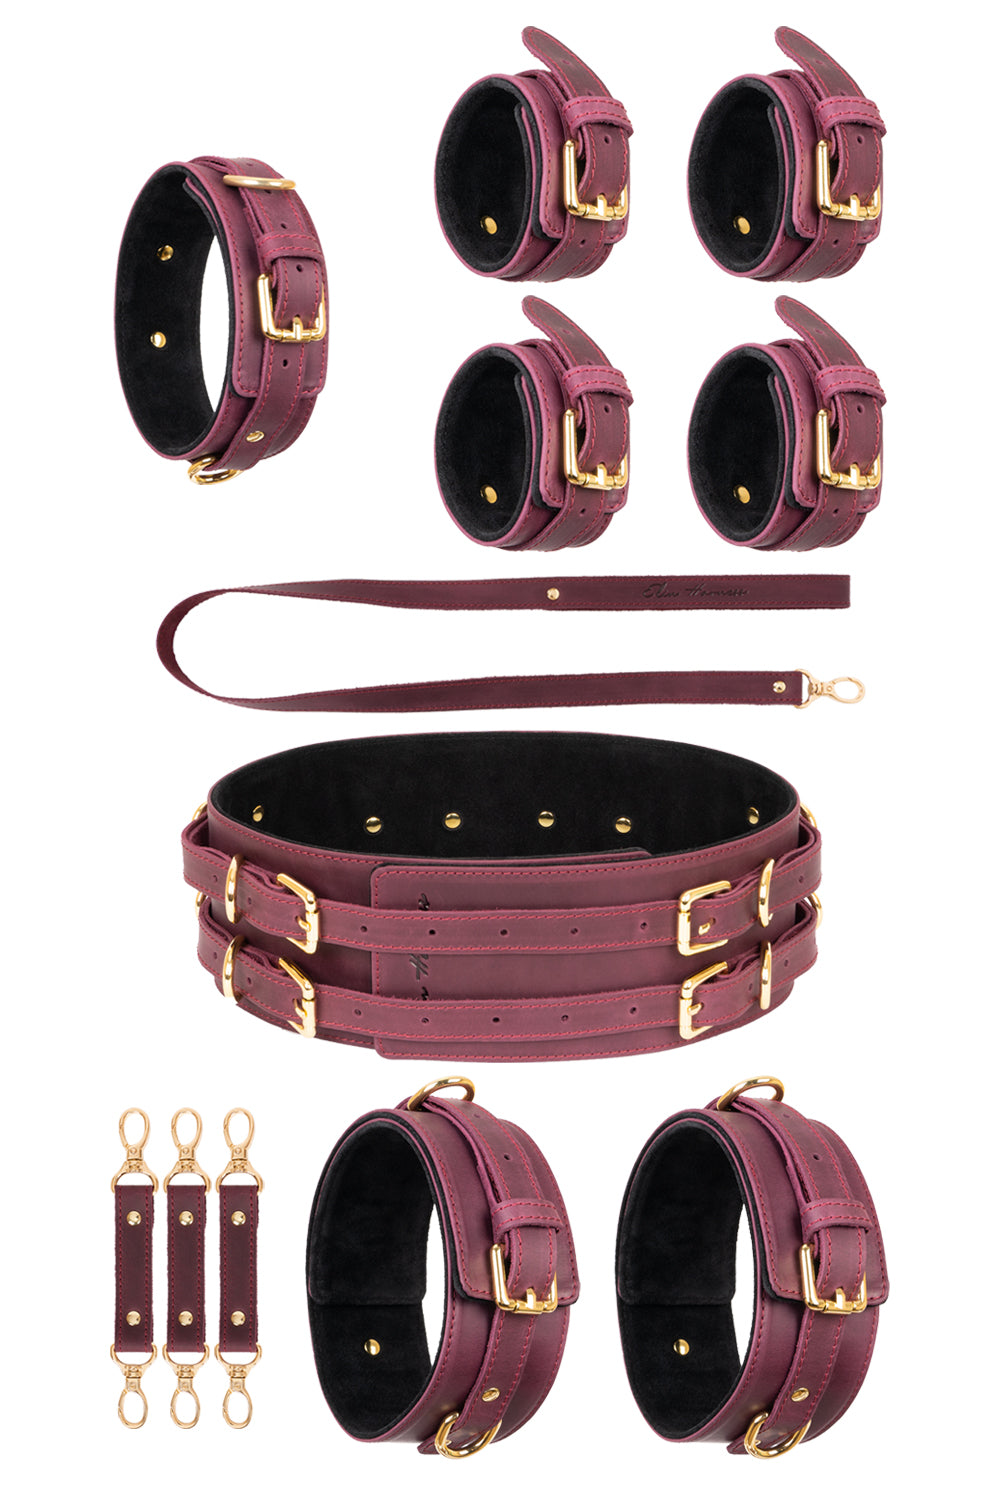 5 in 1 CRAZY HORSE Leather Set. 10 colors